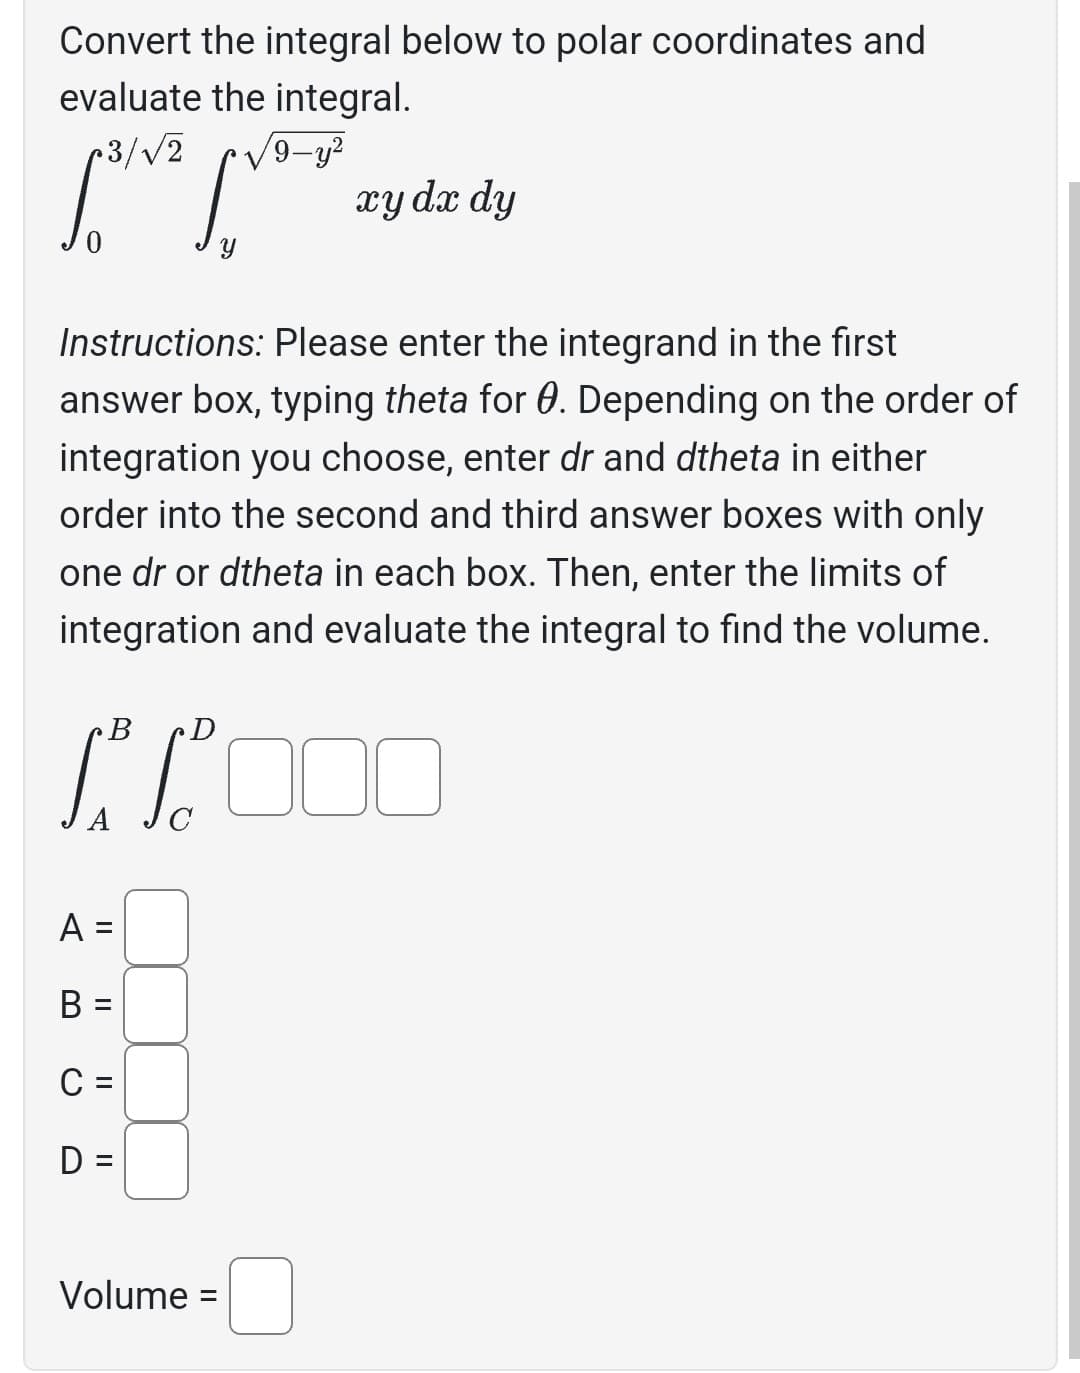 Convert the integral below to polar coordinates and
evaluate the integral.
r3/√2
B
sva
Y
Instructions: Please enter the integrand in the first
answer box, typing theta for 0. Depending on the order of
integration you choose, enter dr and dtheta in either
order into the second and third answer boxes with only
one dr or dtheta in each box. Then, enter the limits of
integration and evaluate the integral to find the volume.
A =
B =
C =
D =
/9-y²
//000
C
Volume
xy dx dy
=